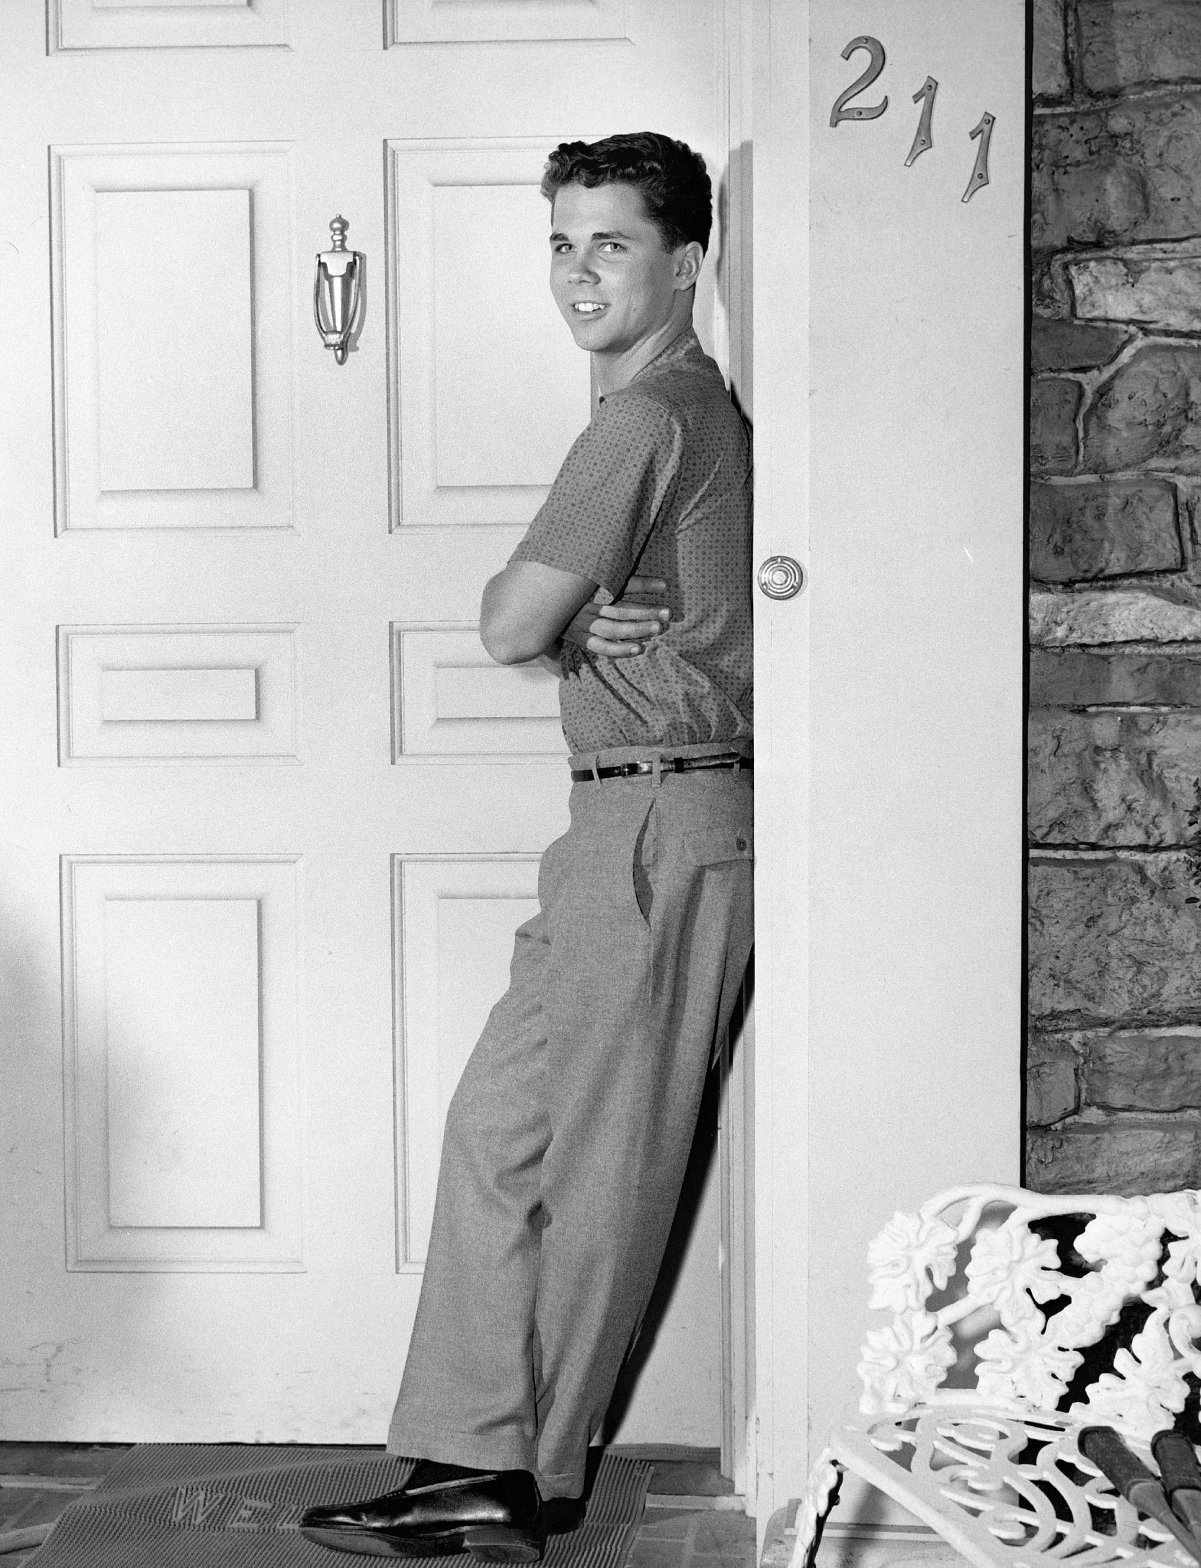 'Leave It to Beaver's actor Tony Dow who portrayed Wally Beaver, in front of the Cleaver home, circa 1960